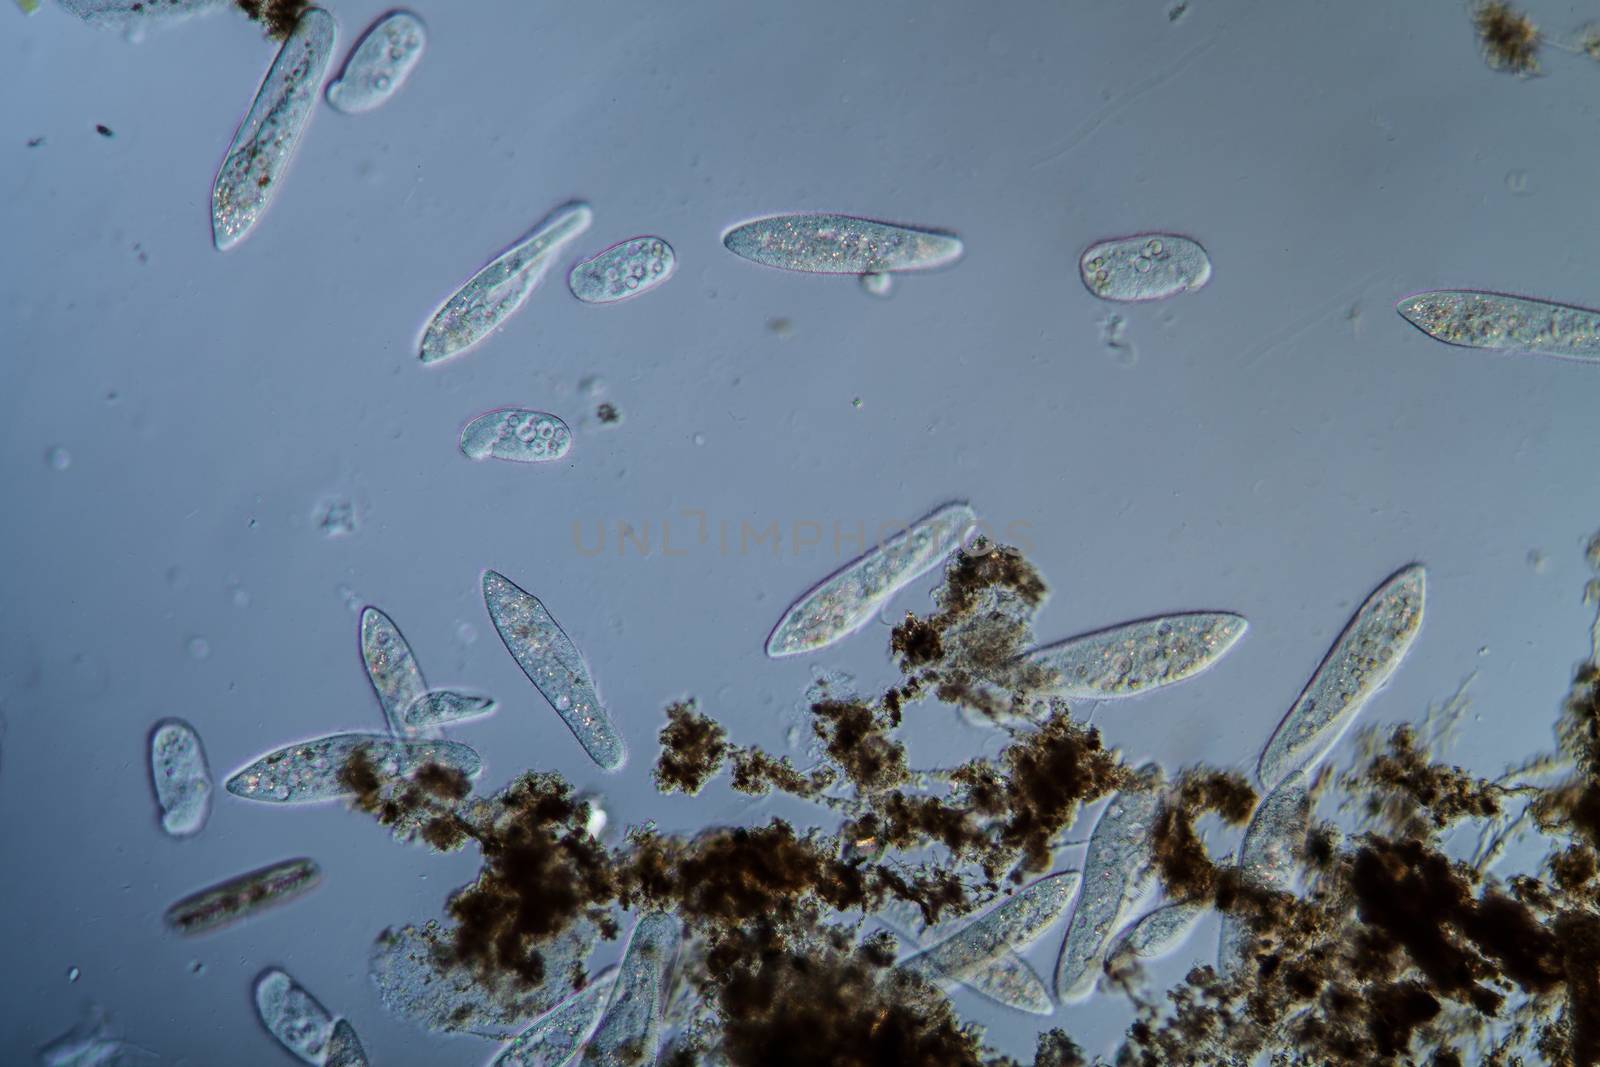 Plankton with microscopic ciliates by Dr-Lange